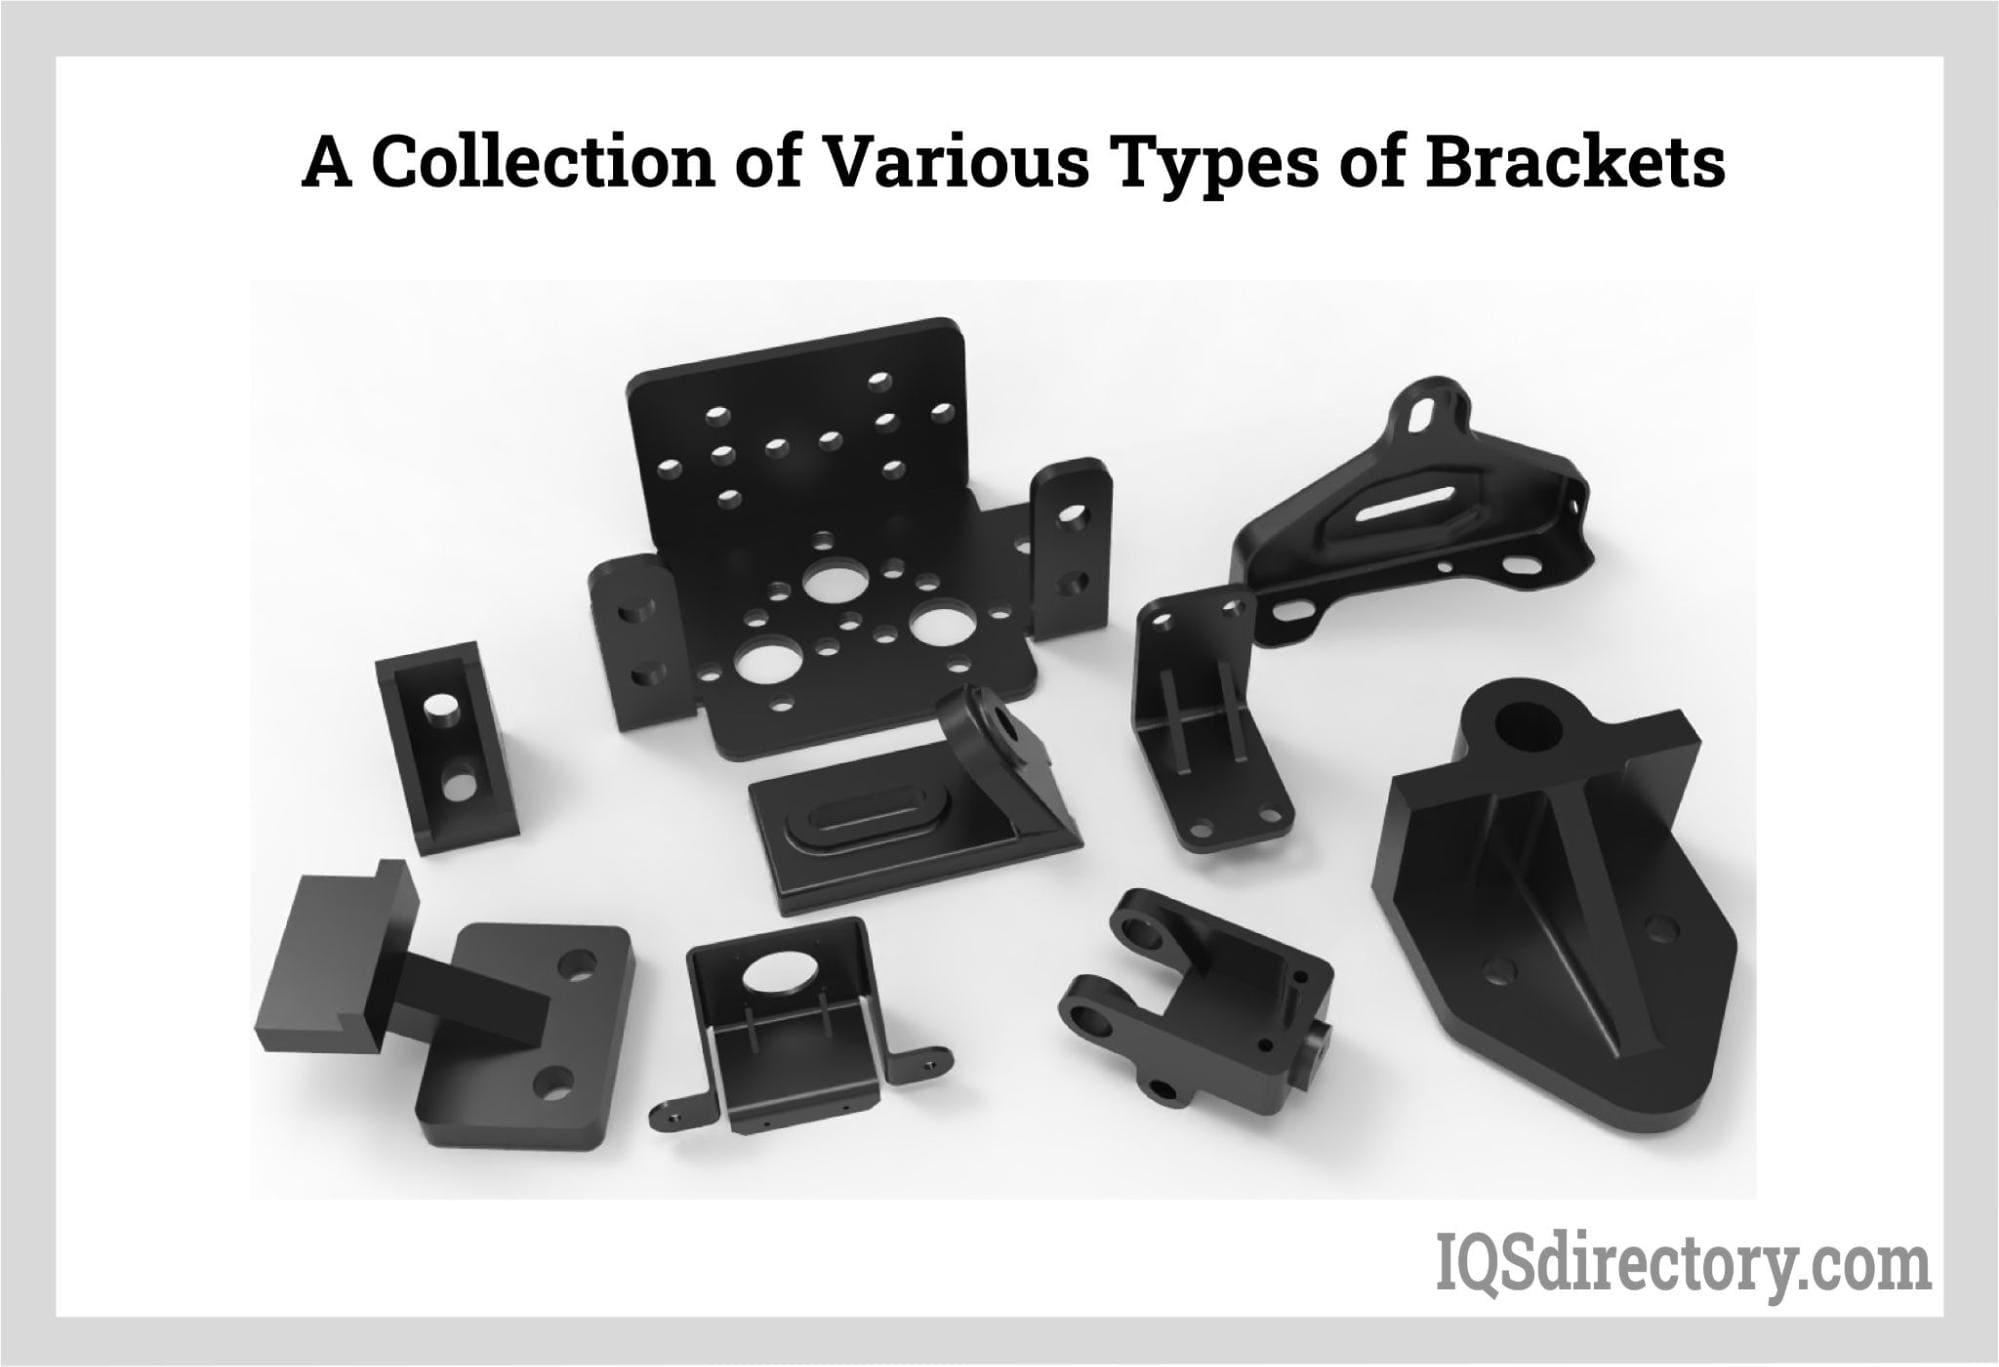 A Collection of Various Types of Brackets